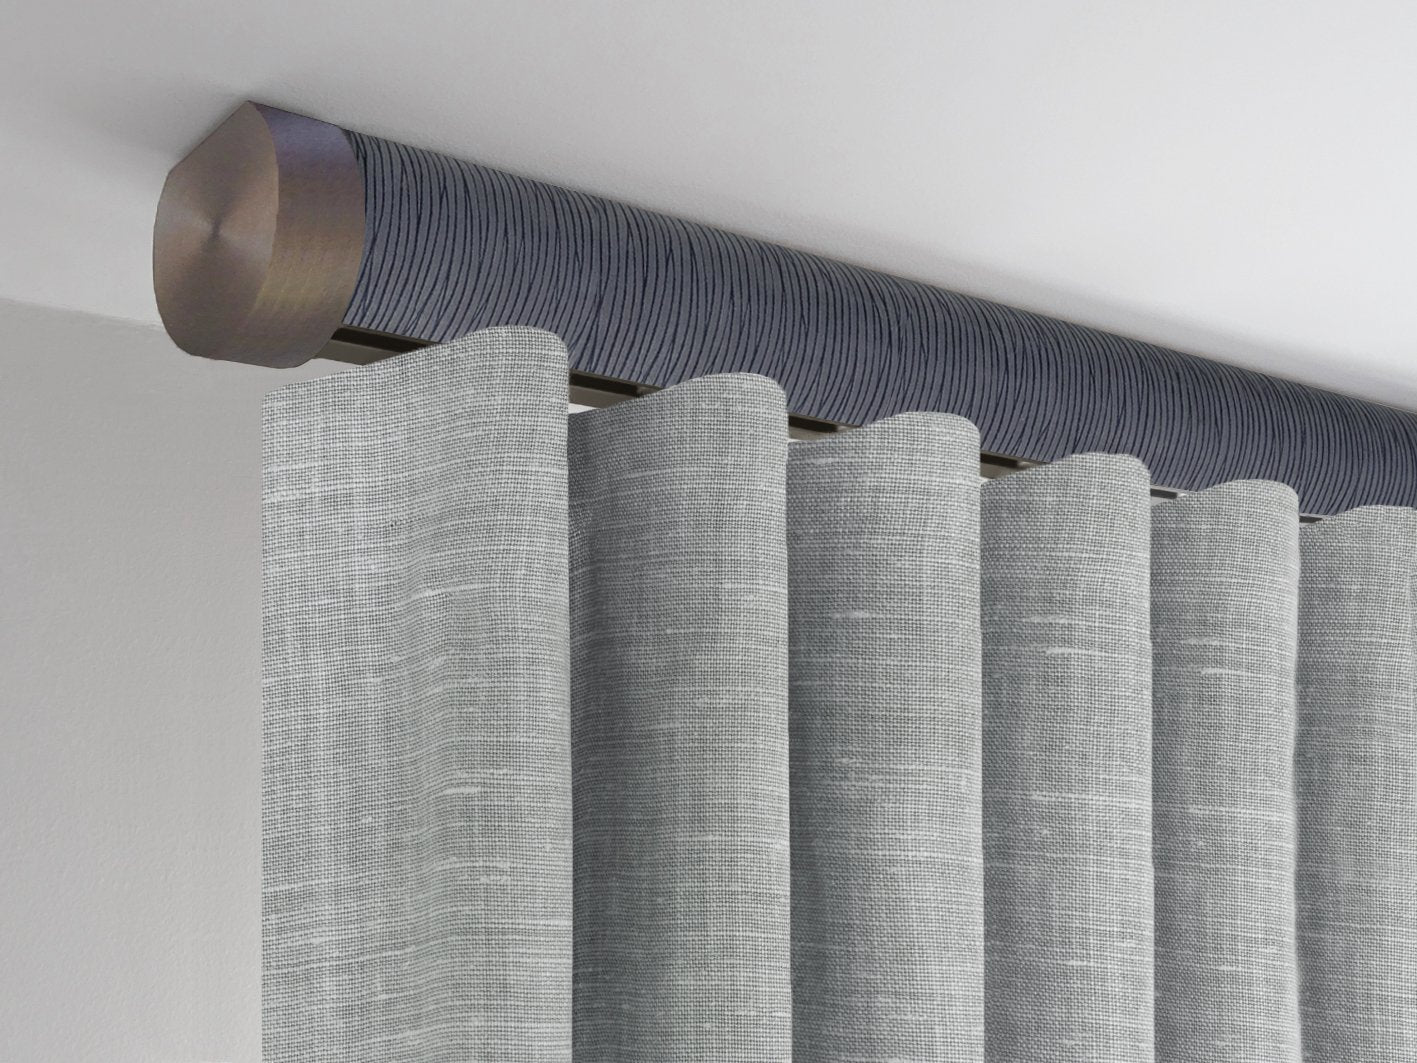 Ceiling Fix Tracked Curtain Rod in Flint, Specialist Curtain Pole